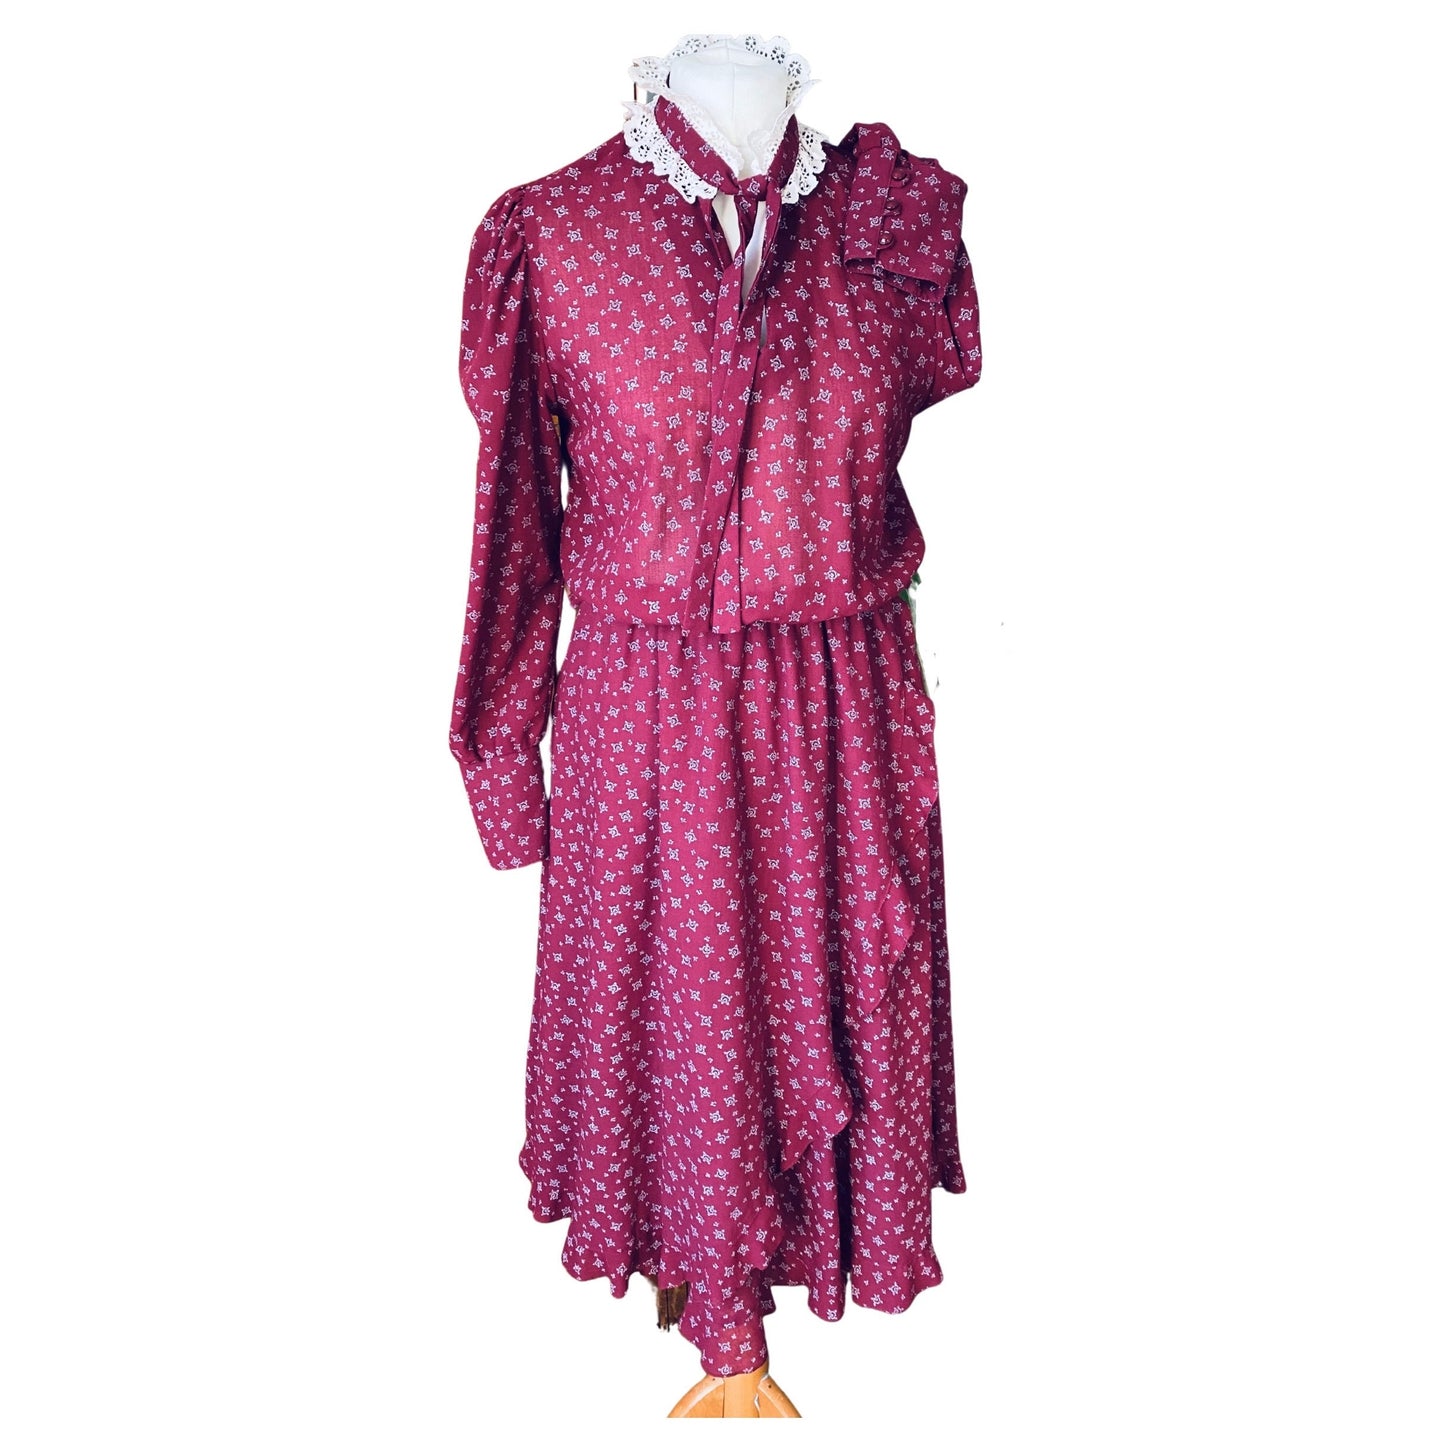 Burgundy prairie dress with pale grey floral print, long deep cuffed sleeves and white frill and tie around the neckline 